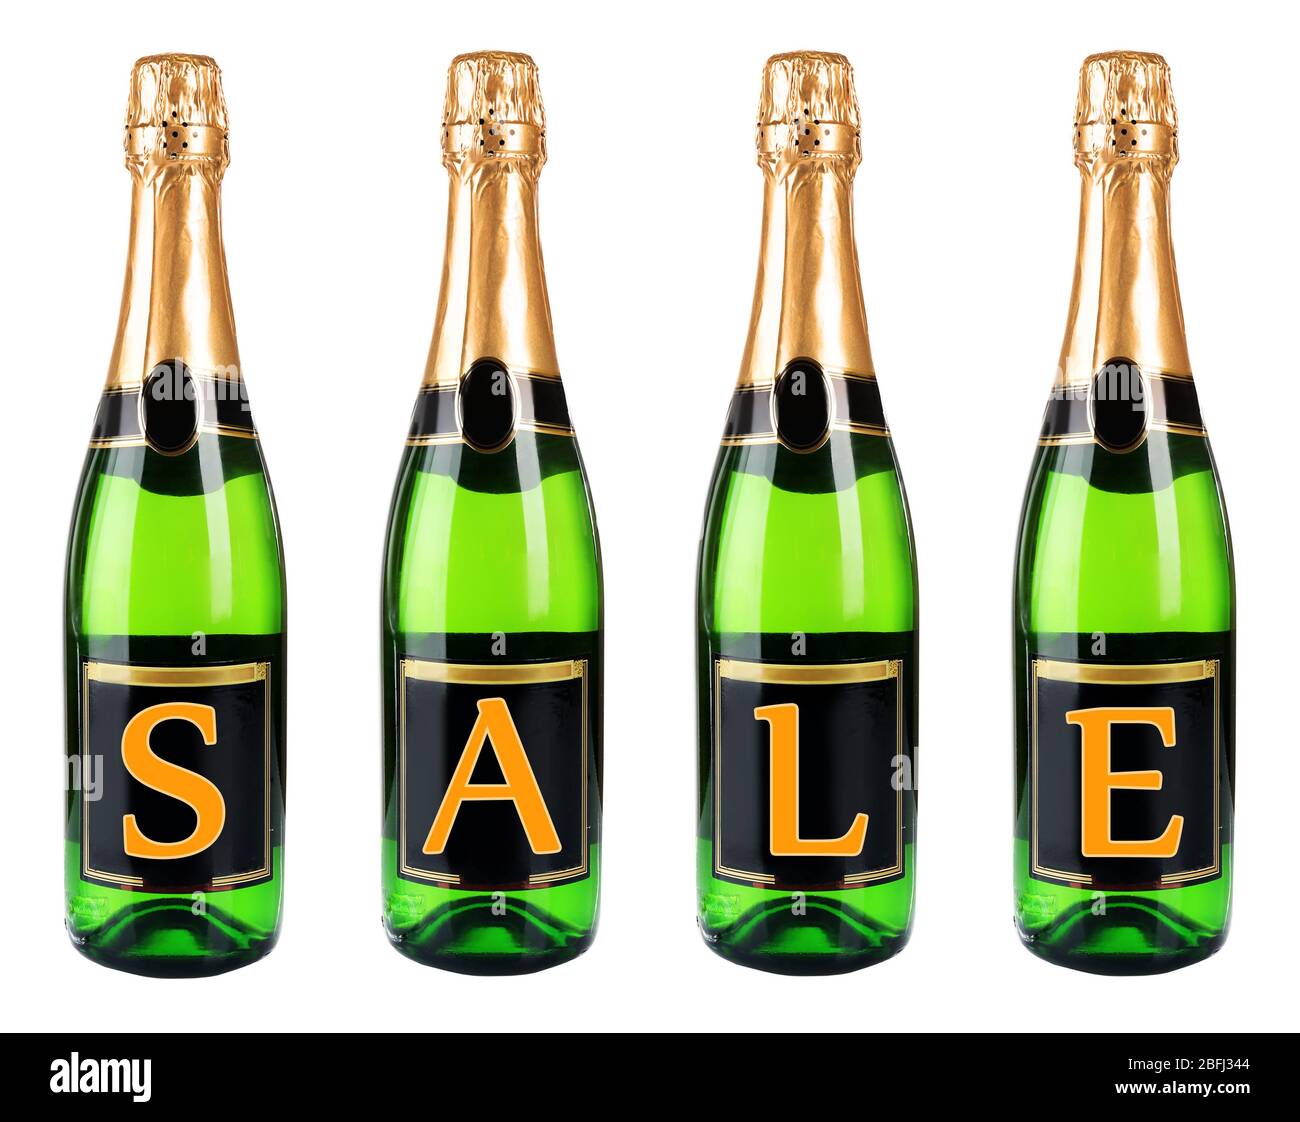 Clearance sale Cut Out Stock Images & Pictures - Alamy